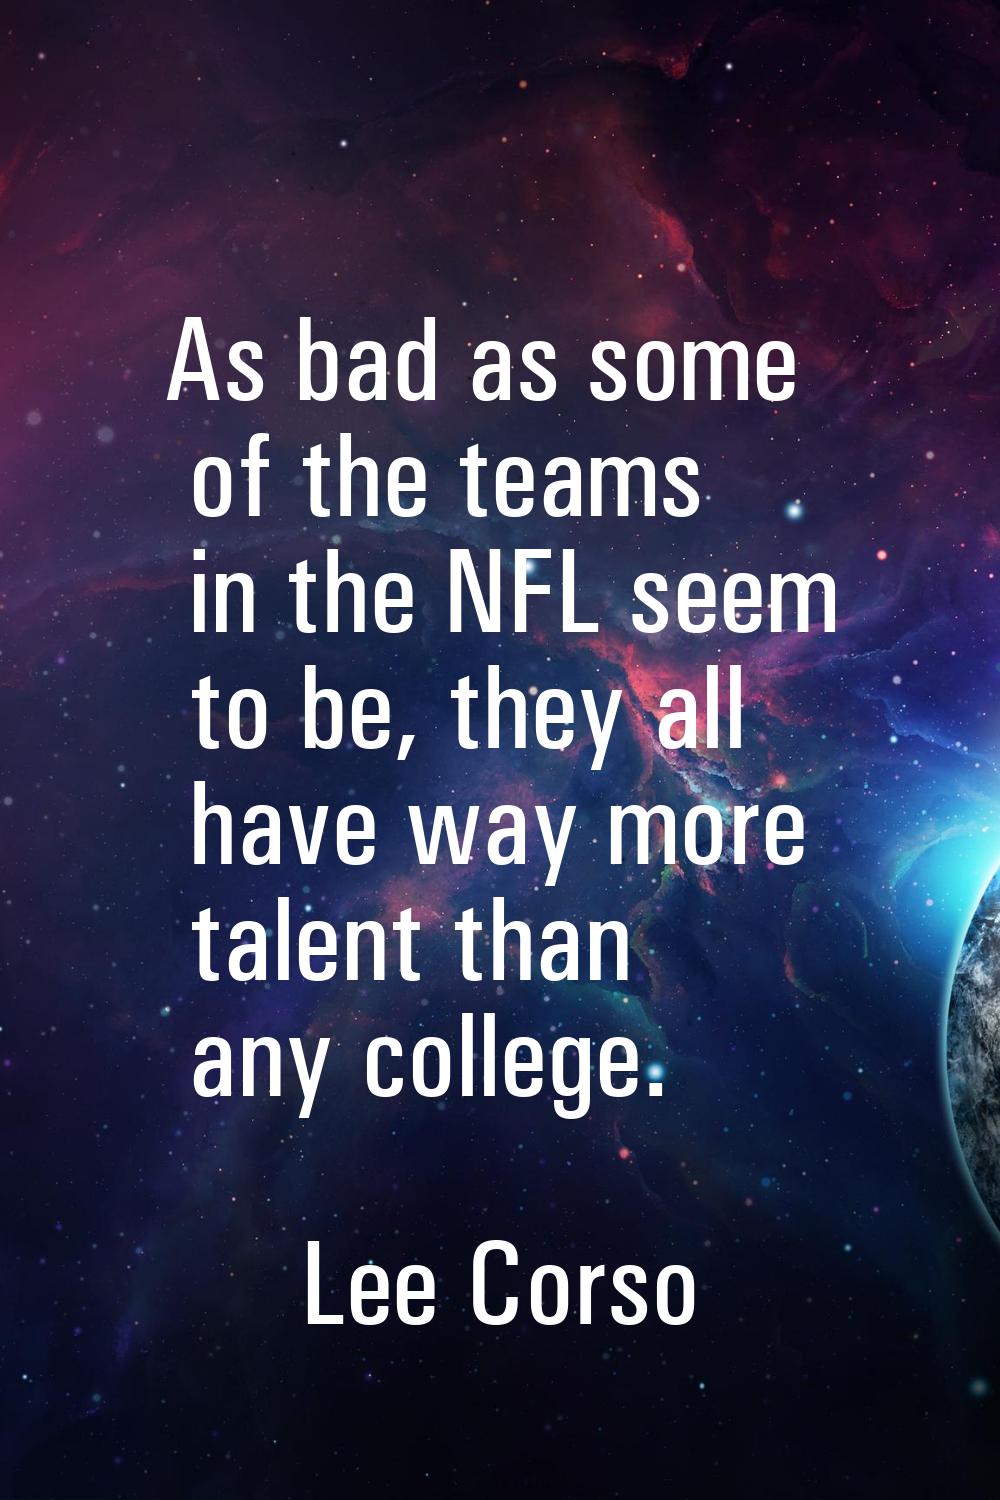 As bad as some of the teams in the NFL seem to be, they all have way more talent than any college.